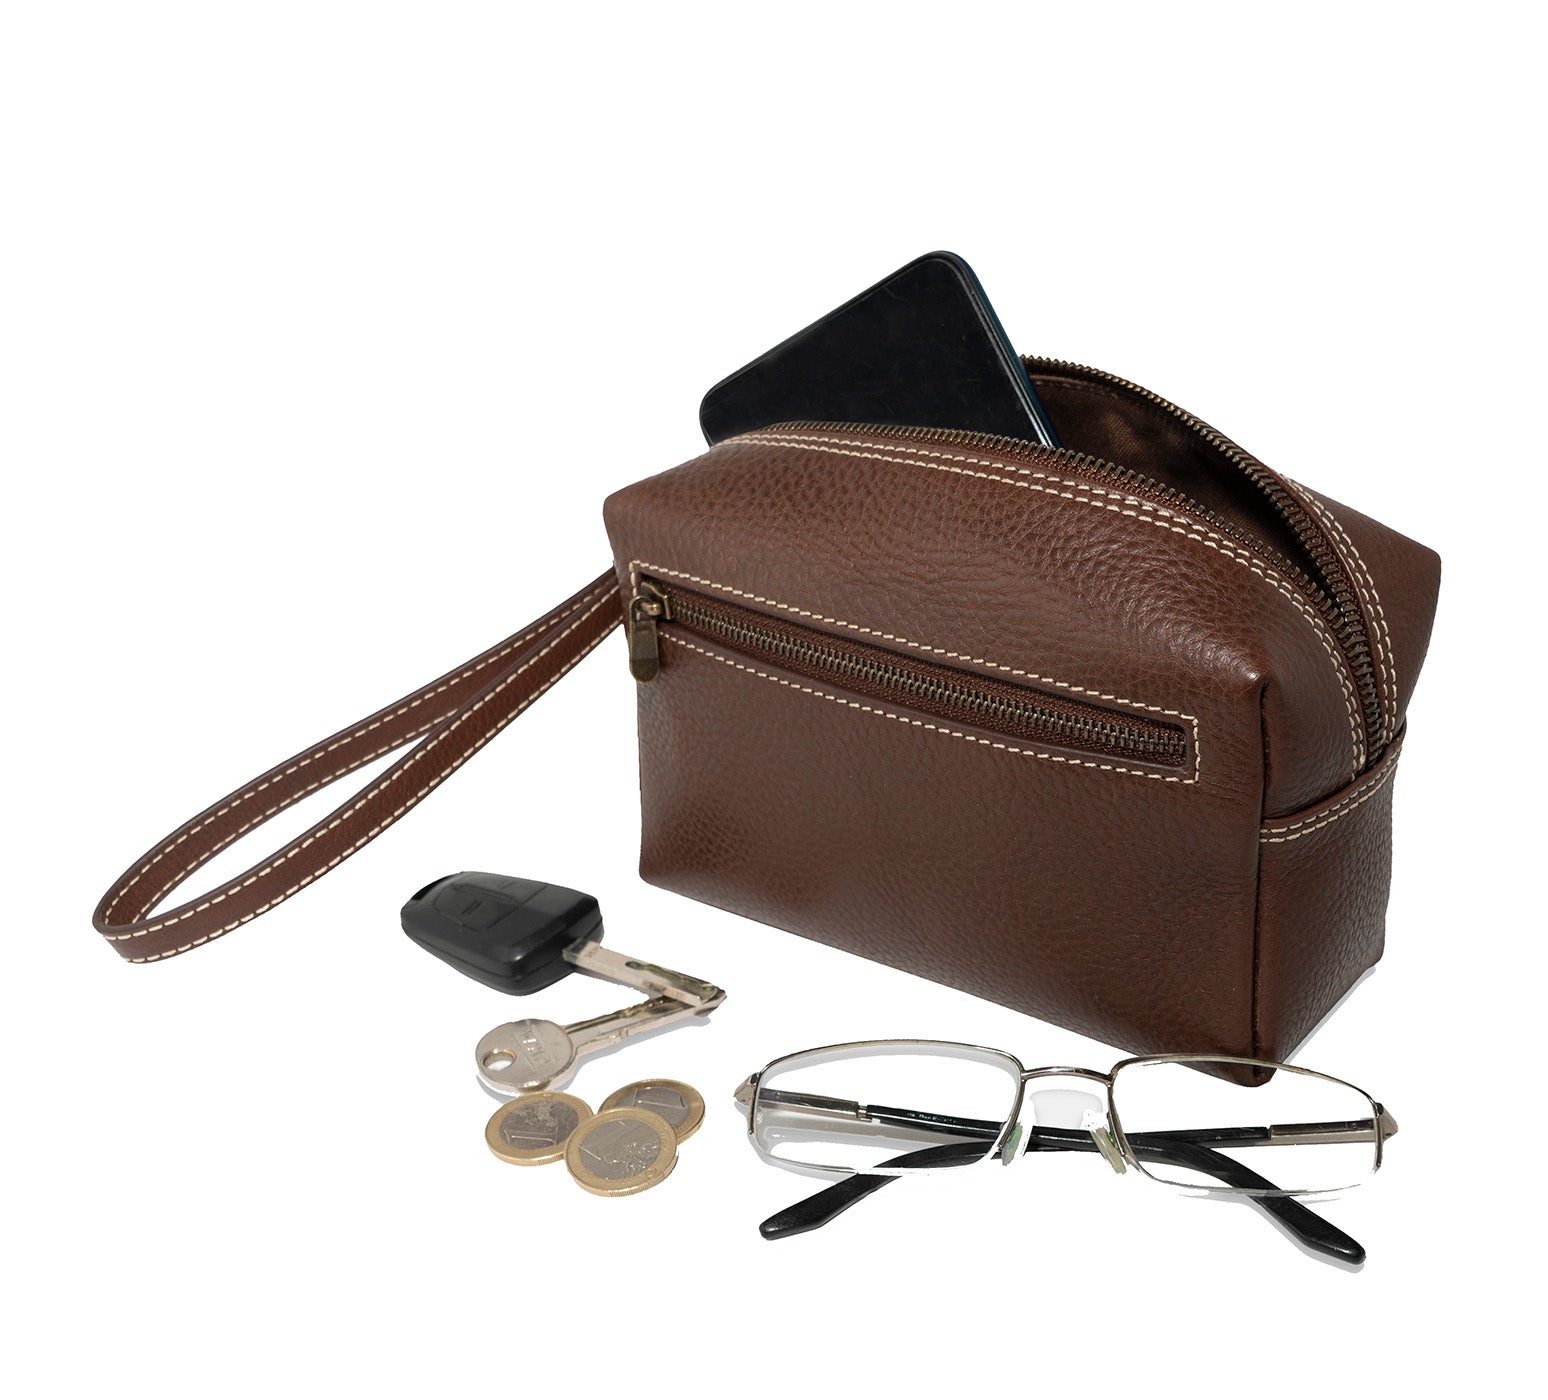 Leather Wrist Bag from Rydal in 'Dark Brown' showing contents.